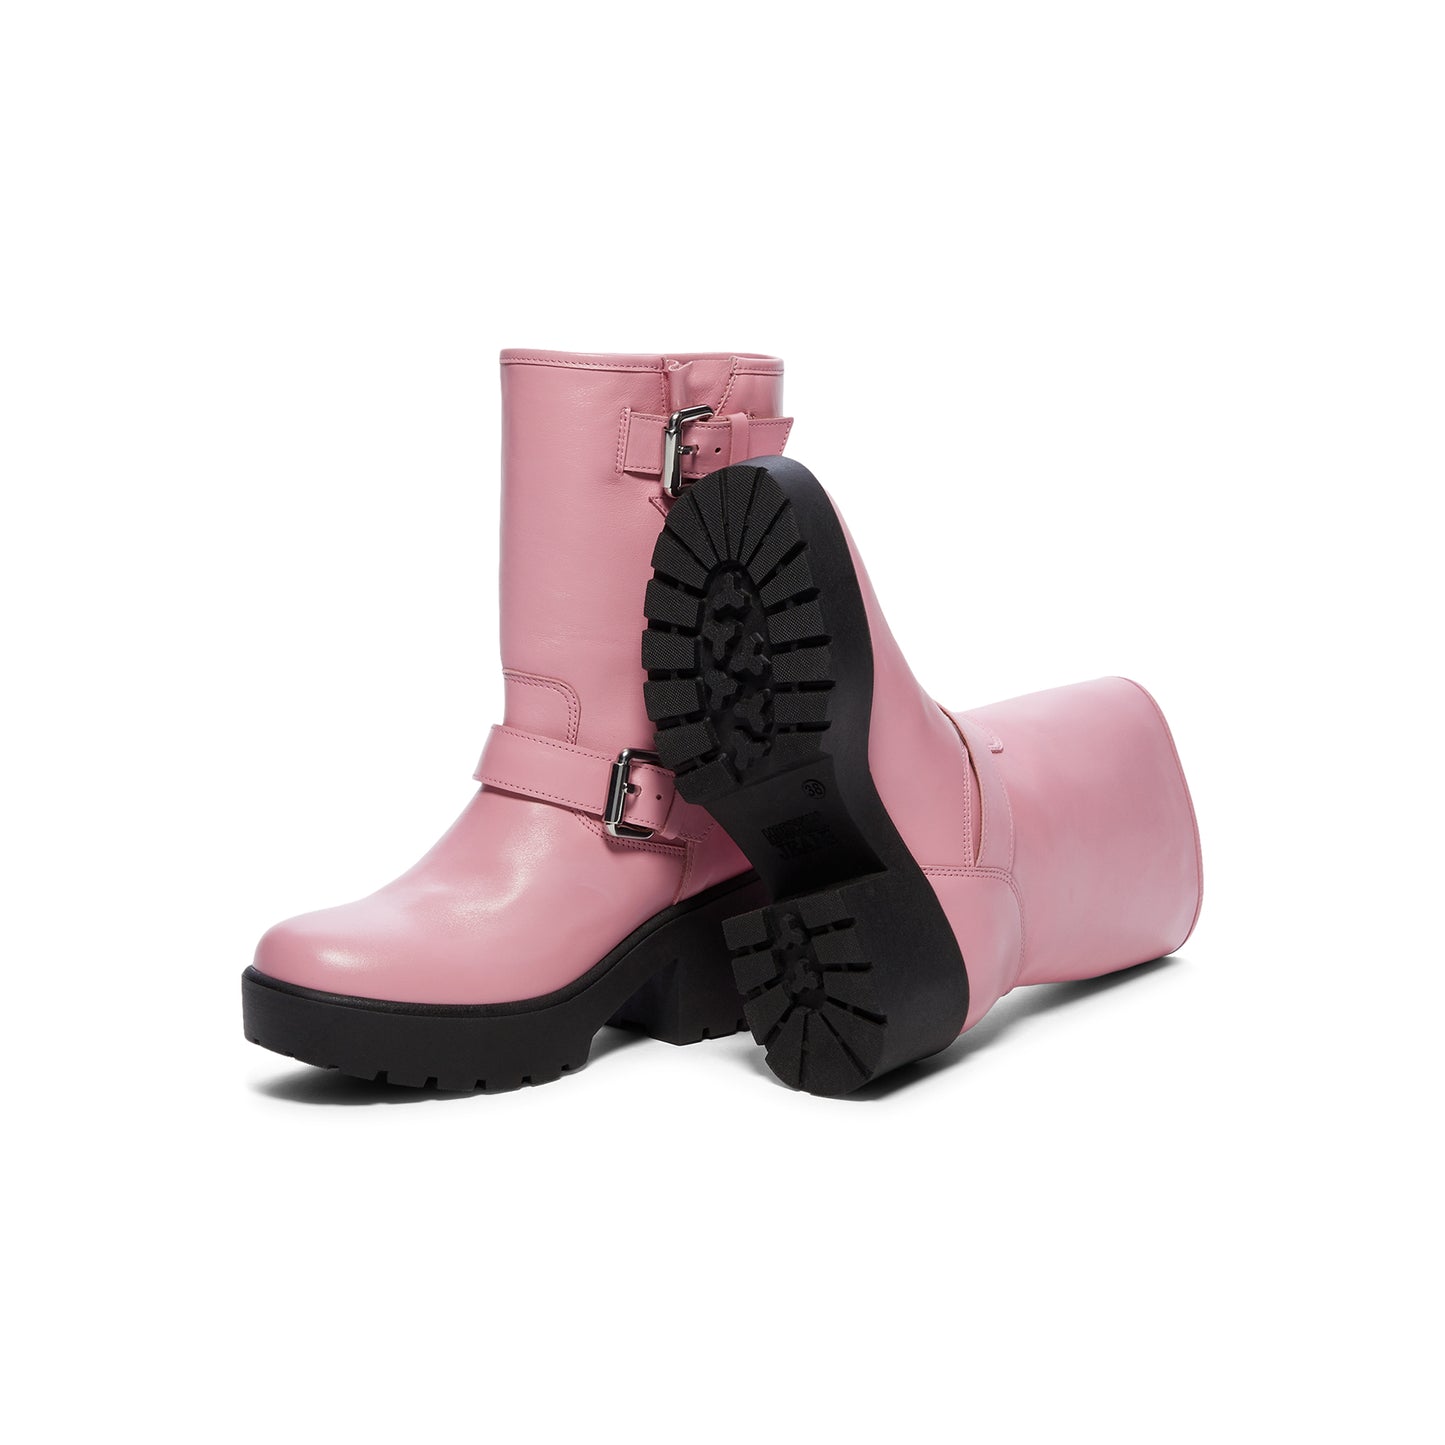 Moschino Jeans Pre Shoes (Pink)